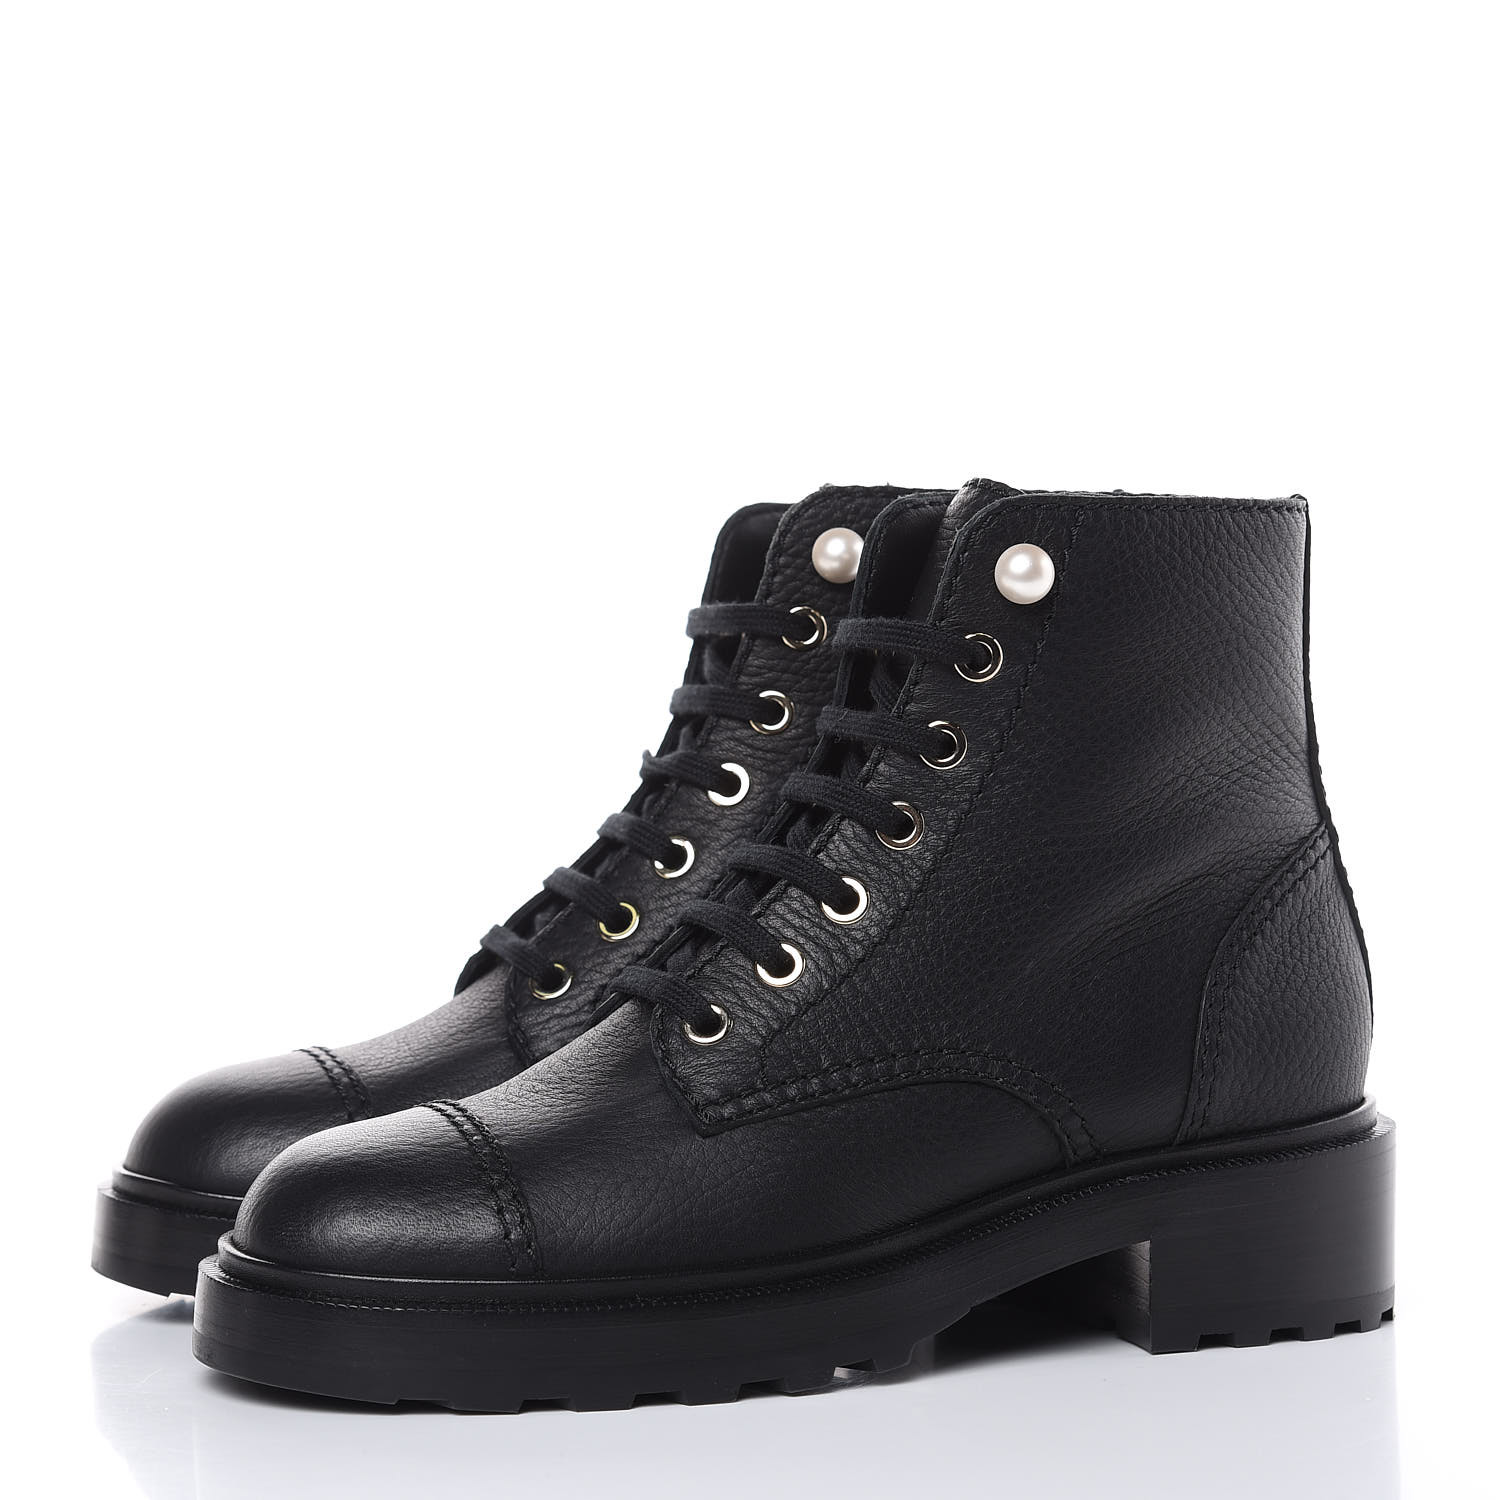 CHANEL Calfskin Pearl Combat Ankle Boots 37 Black 439561 | FASHIONPHILE